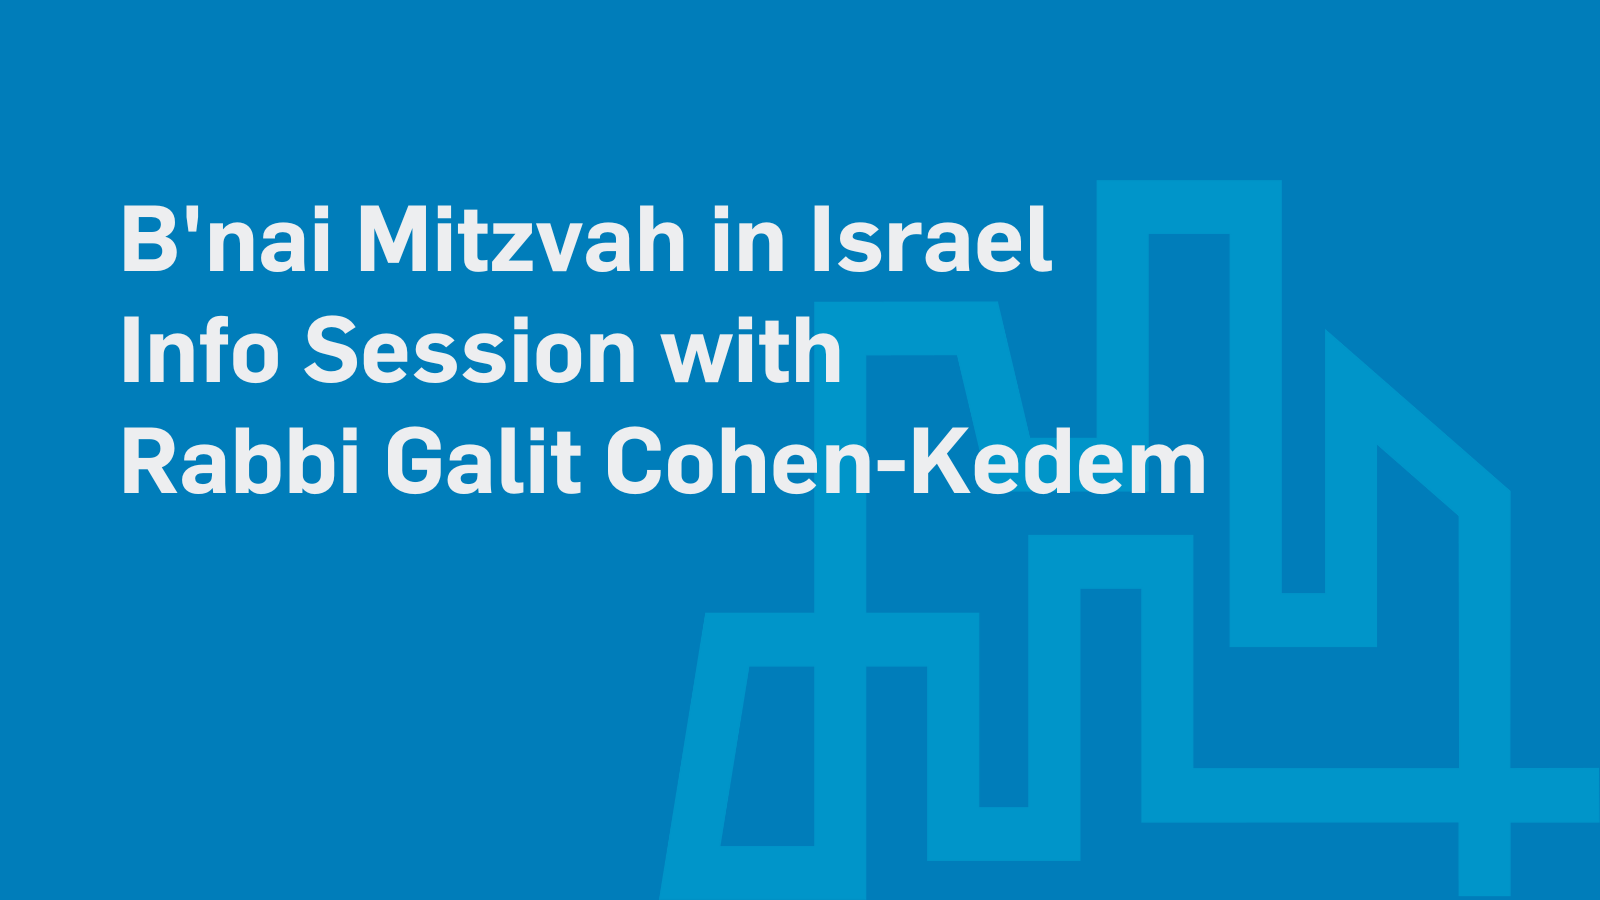 B’nai Mitzvah in Israel Info Session with Rabbi Galit Cohen-Kedem